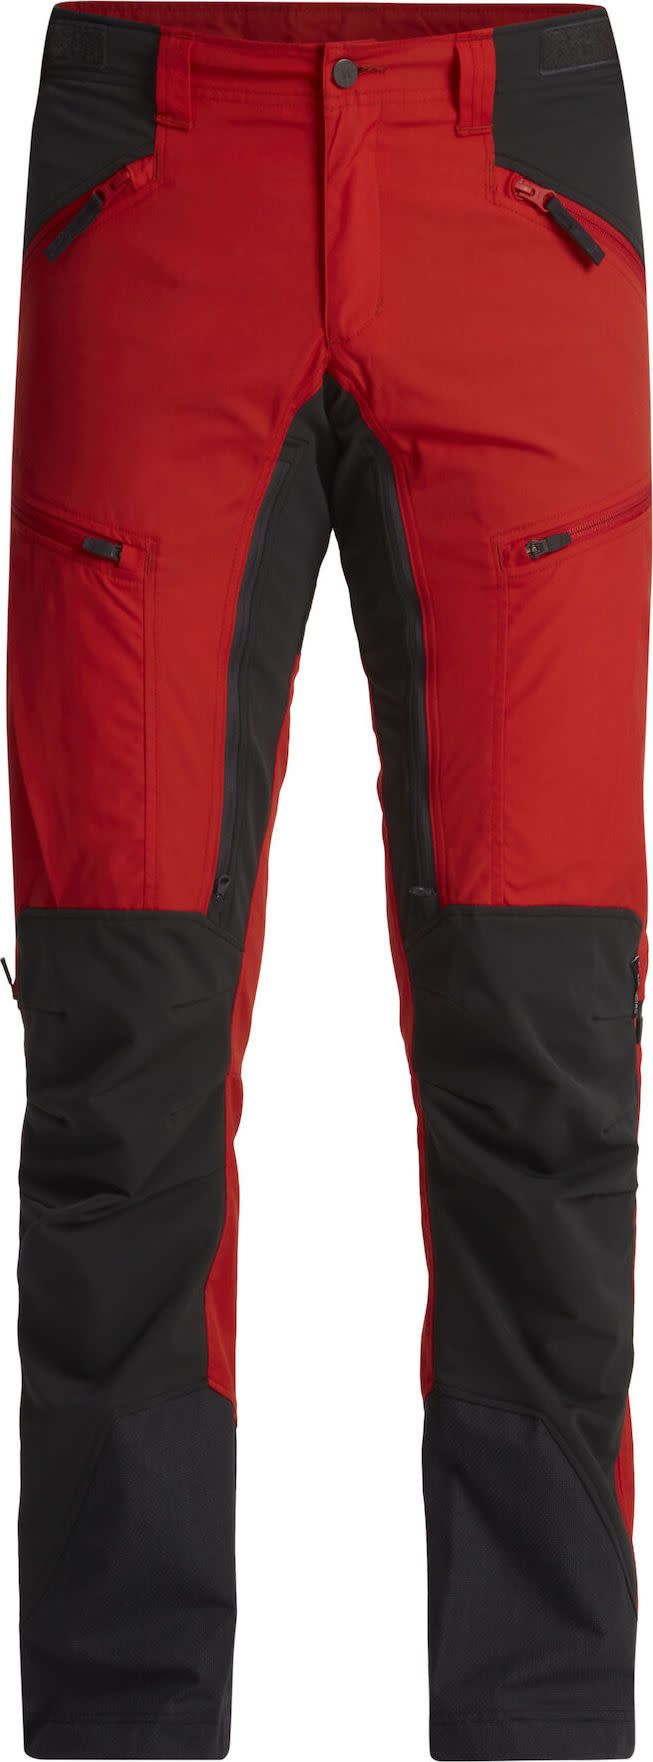 Lundhags Men's Makke Pant Lively Red/Charcoal Lundhags